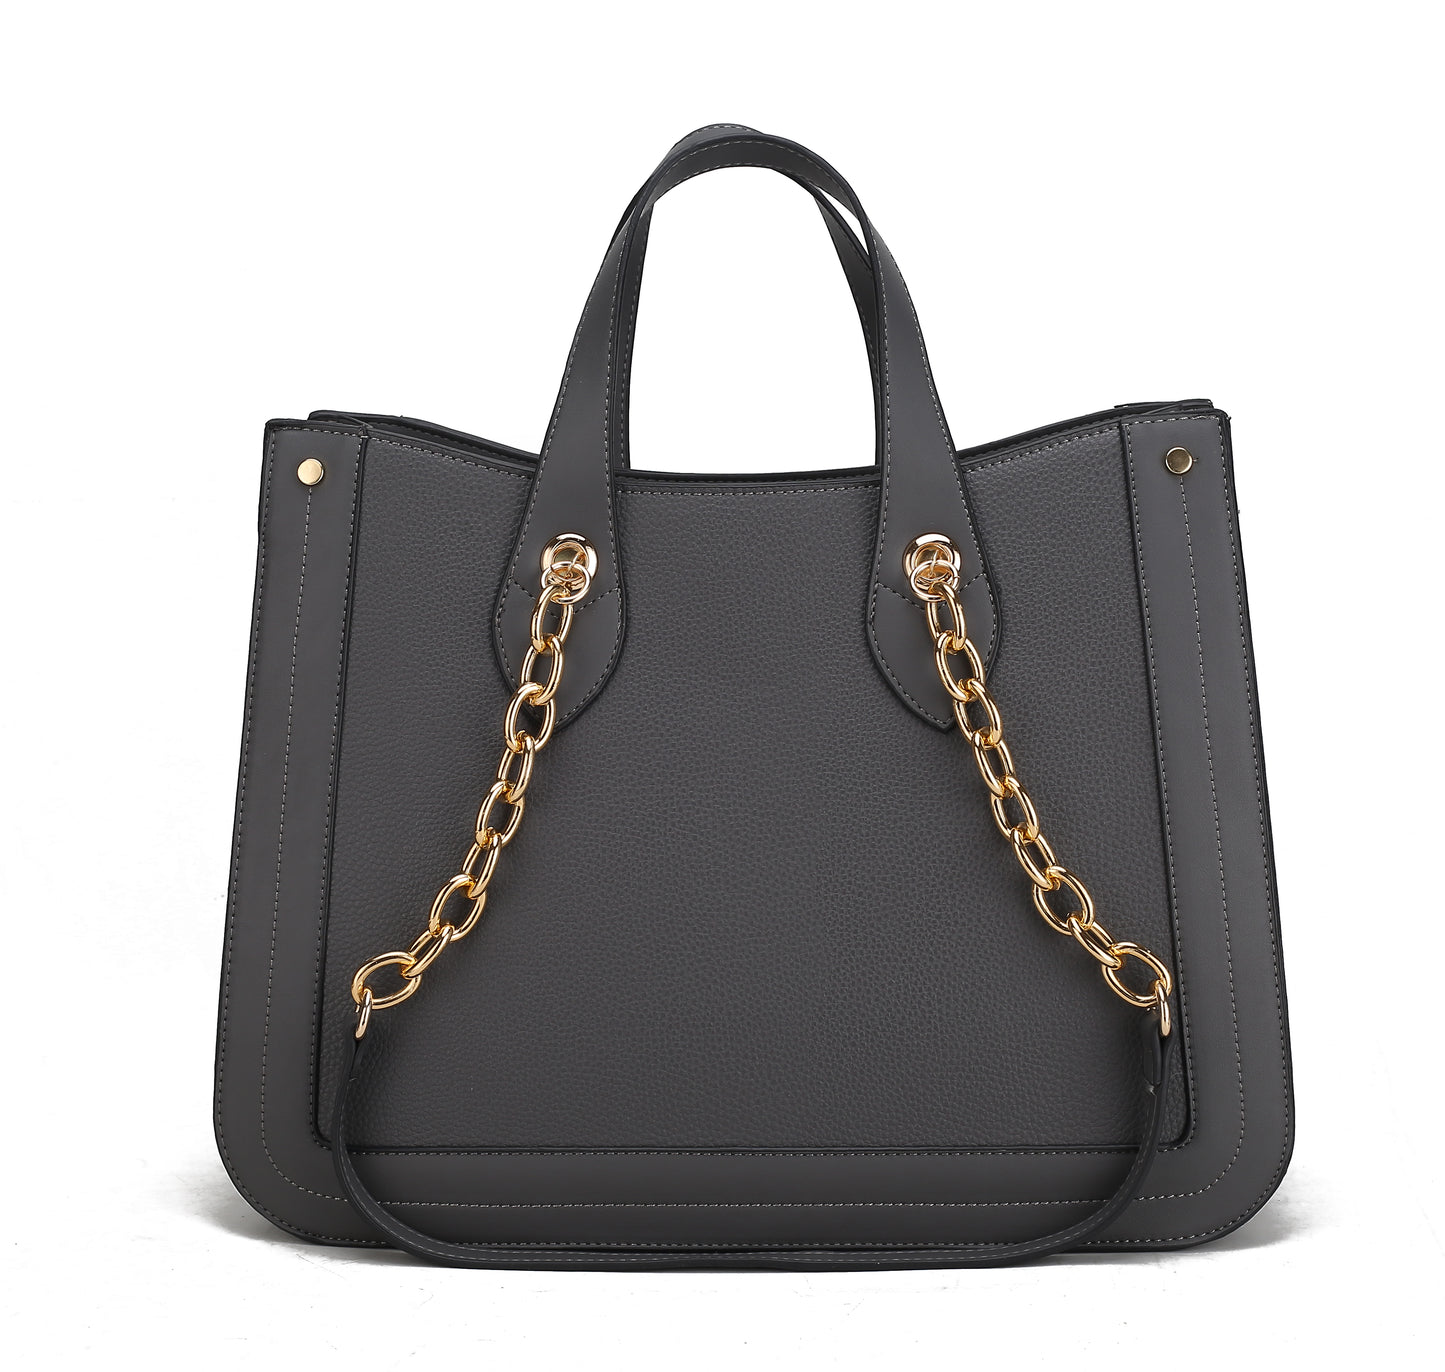 The Pink Orpheus Stella Vegan Leather Women Tote Bag is a grey tote bag with gold chain handles.